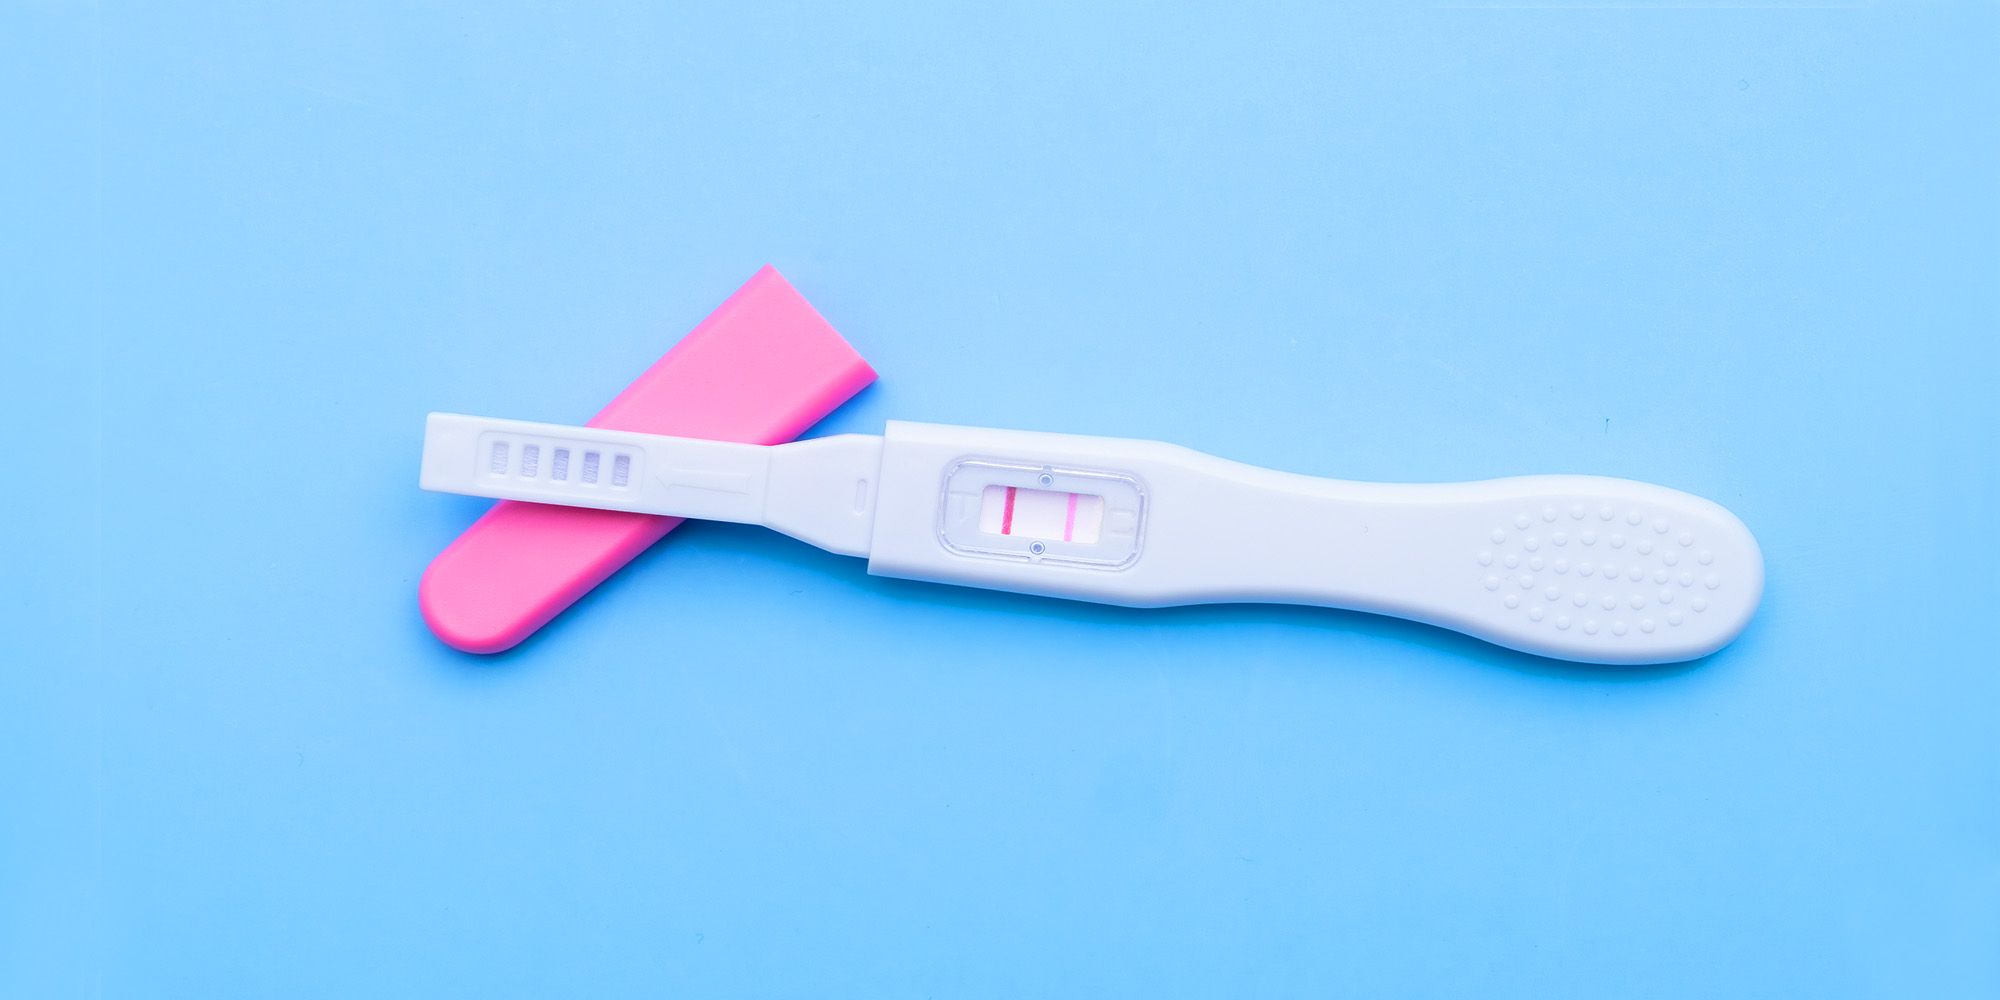 Urine test/blood test for pregnancy - Which is More Accurate